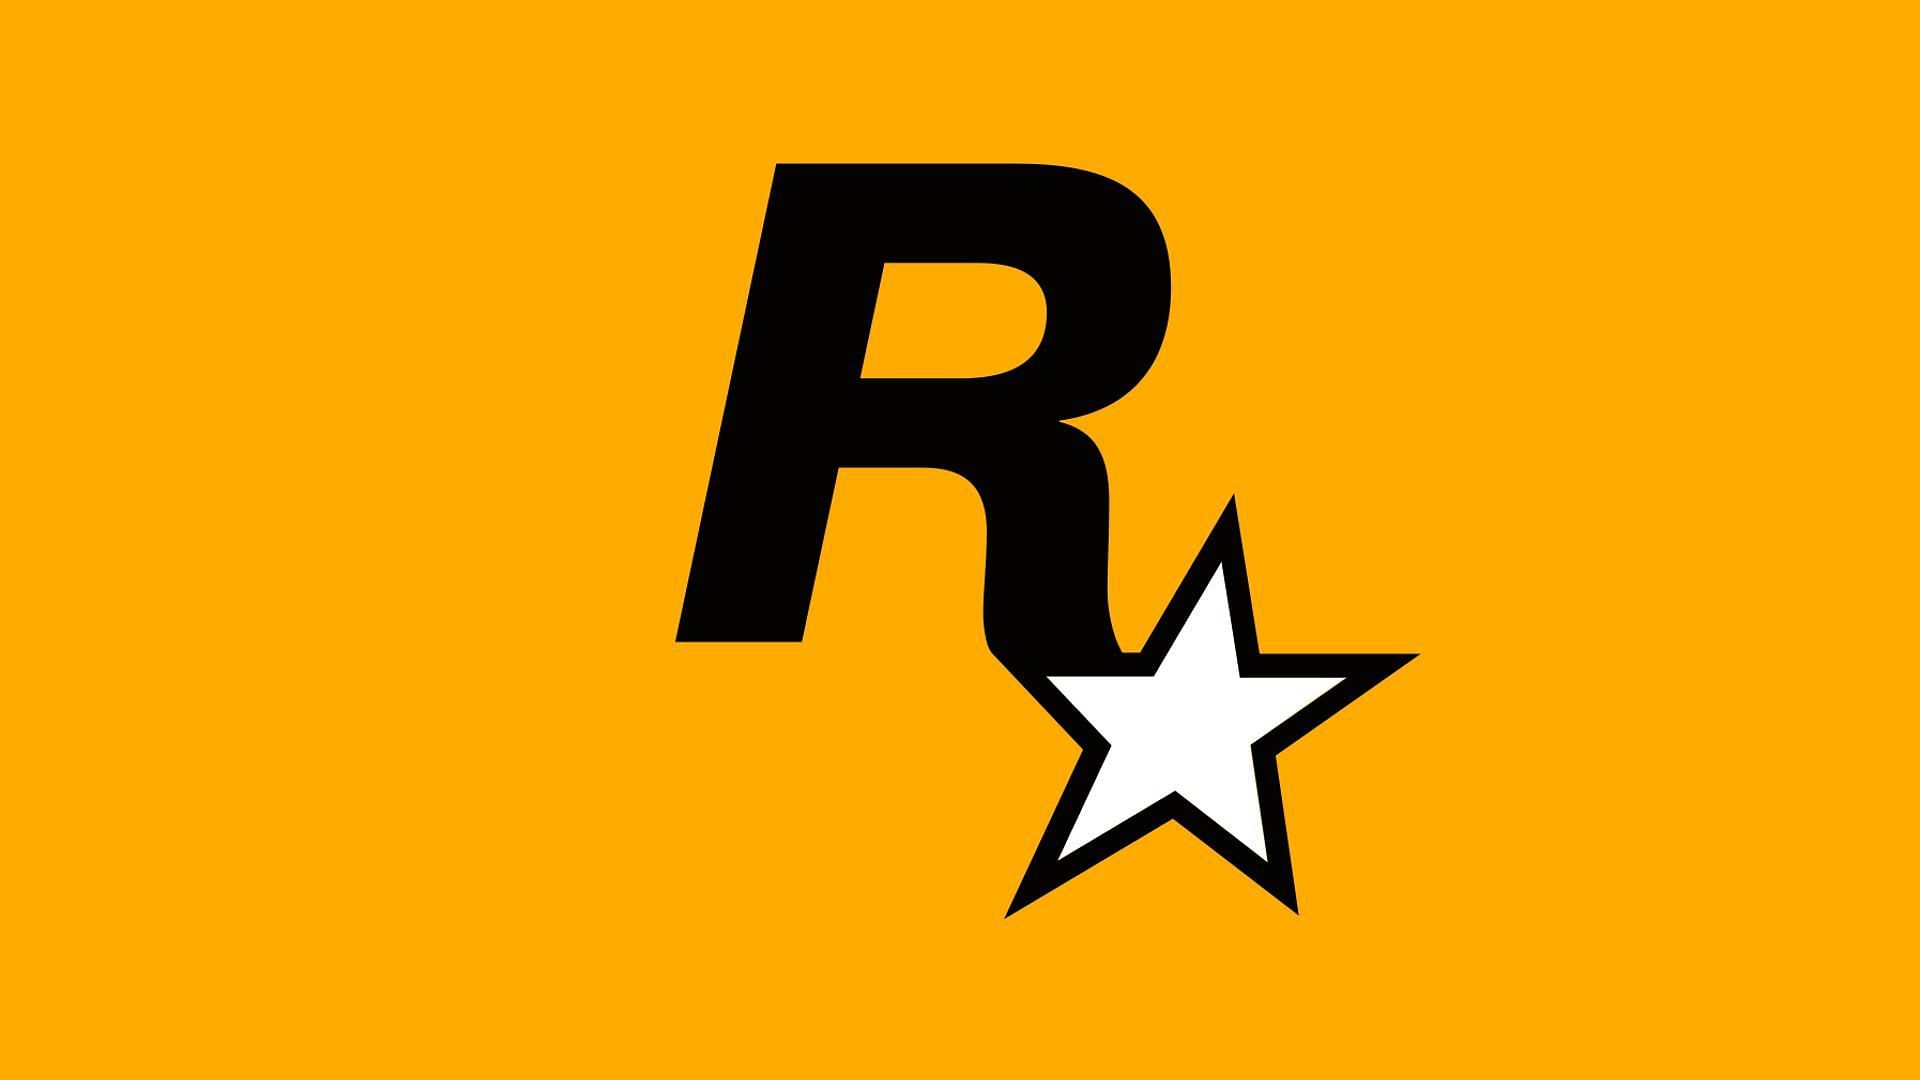 There is no news about an official port coming out any time soon (Image via Rockstar Games)